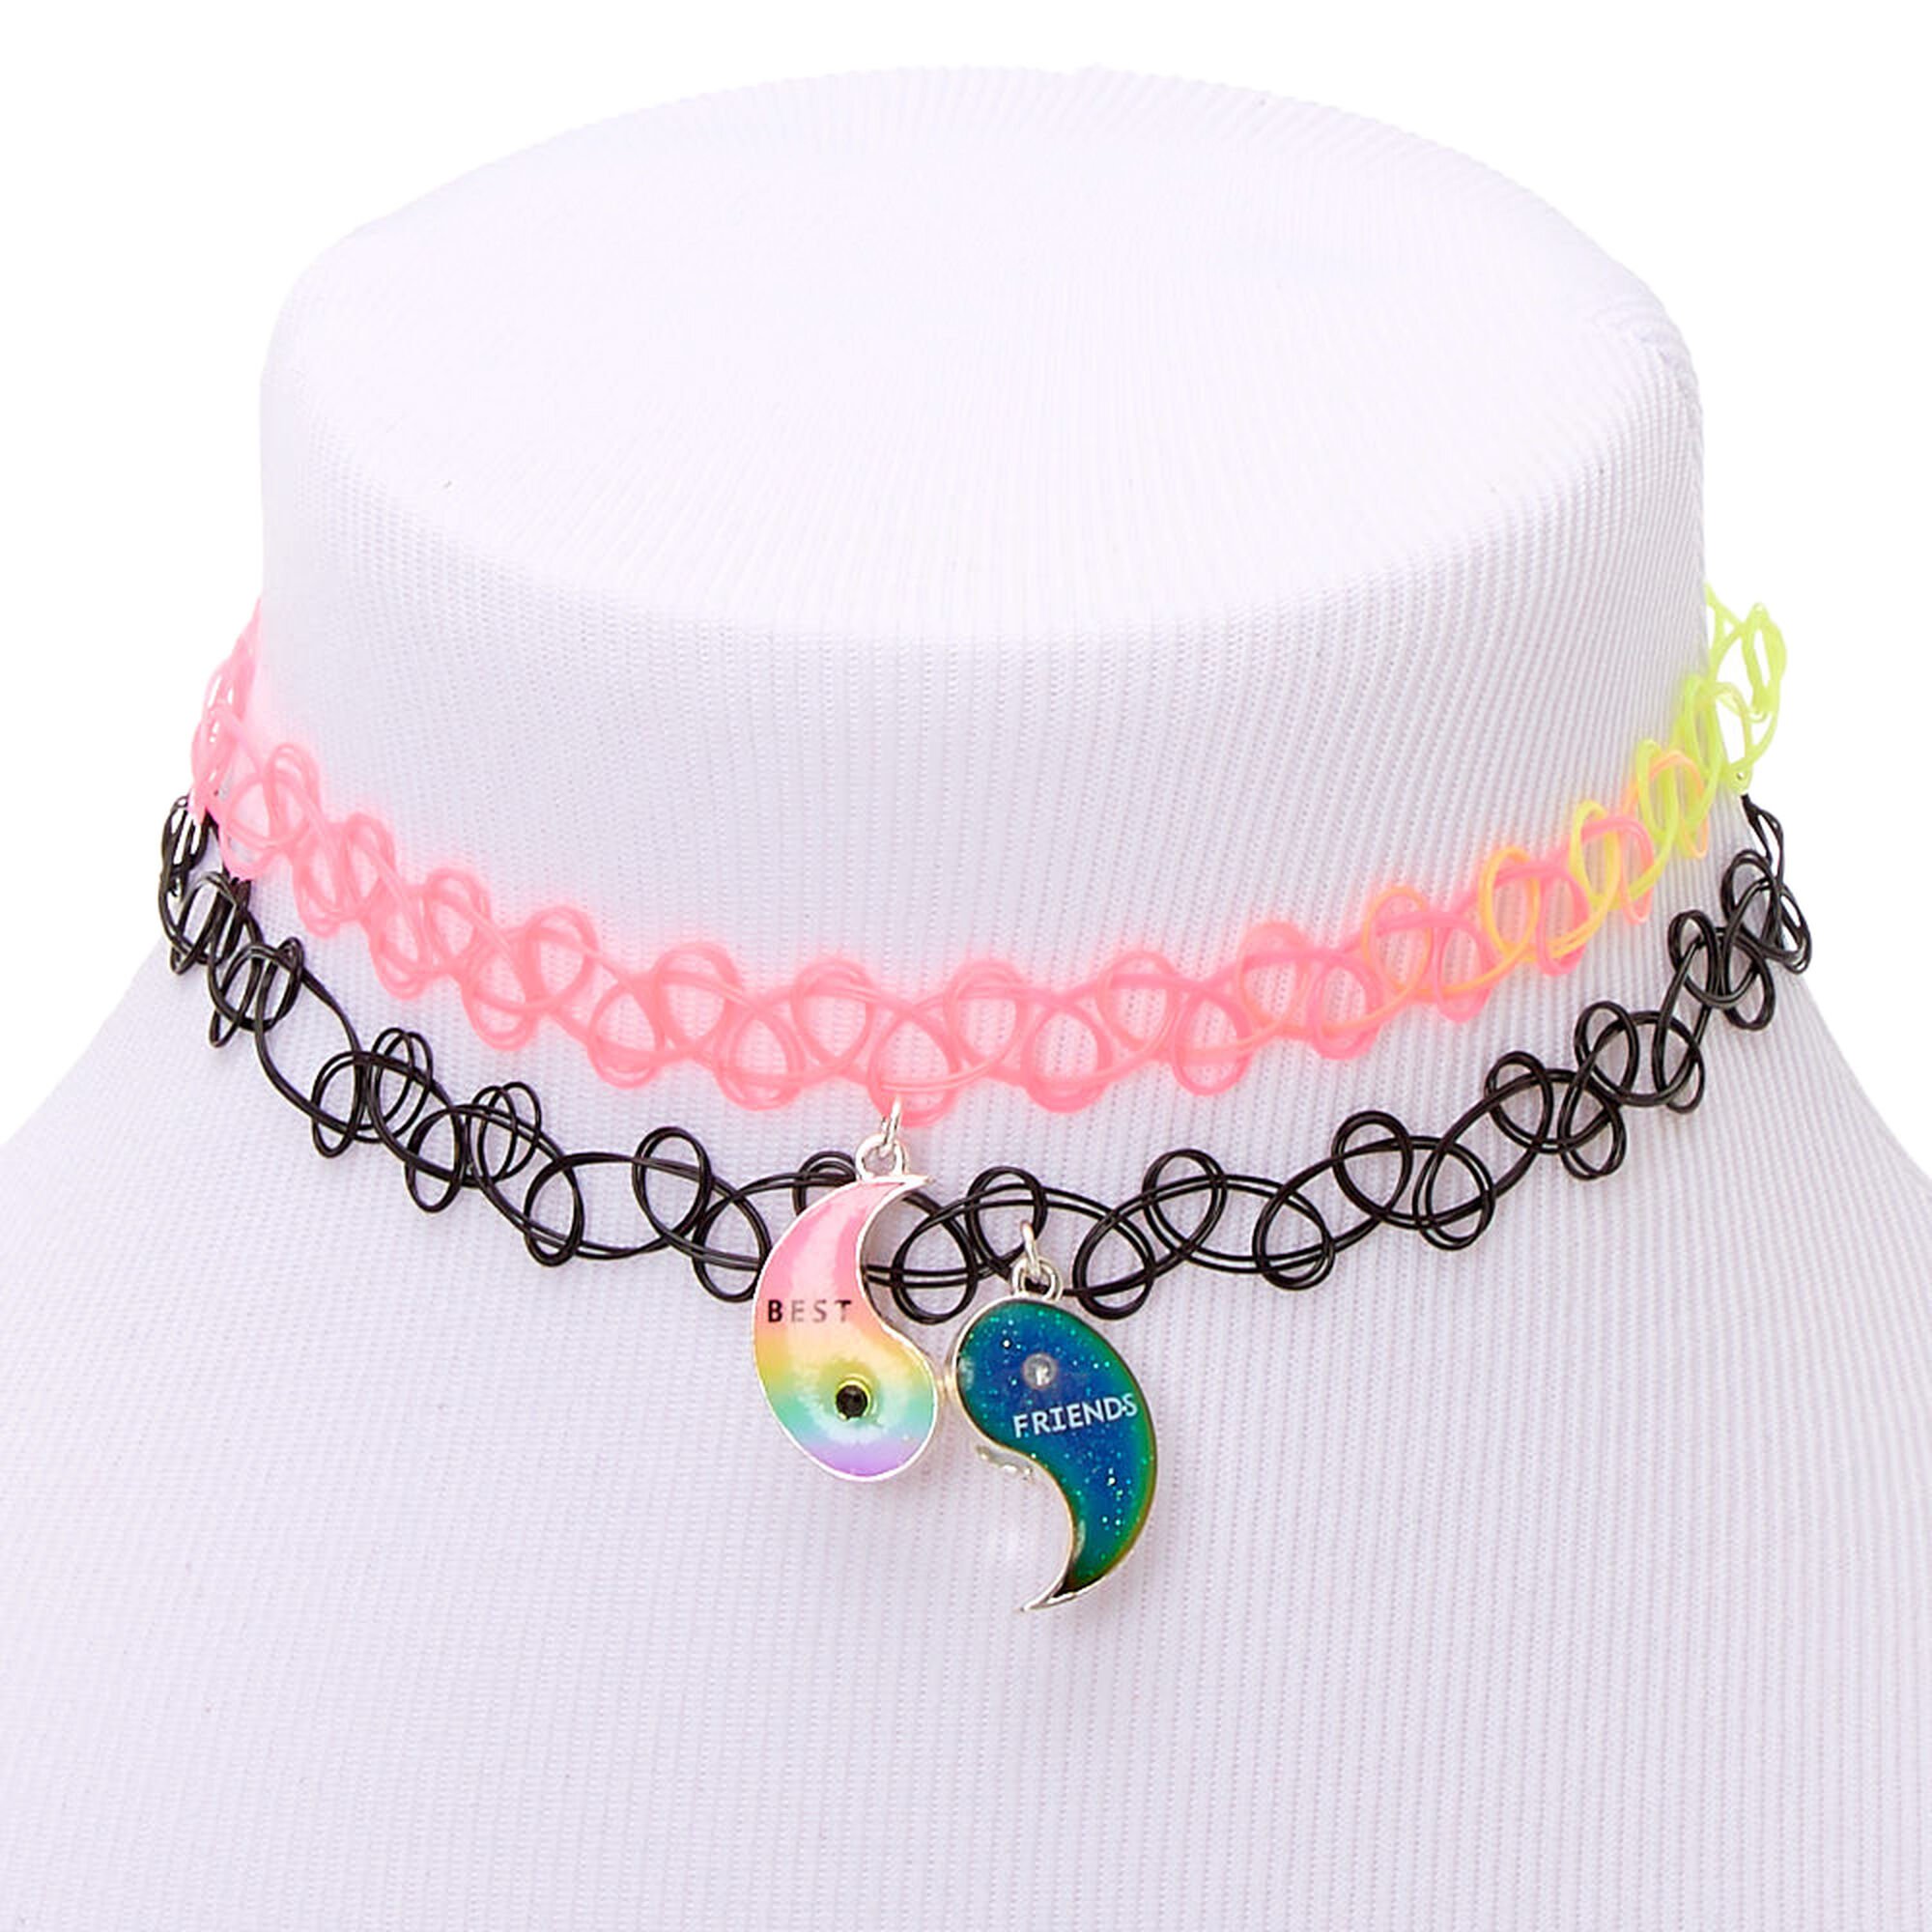 View Claires Best Friends Yin Yang Tattoo Choker Necklaces 2 Pack Rainbow information